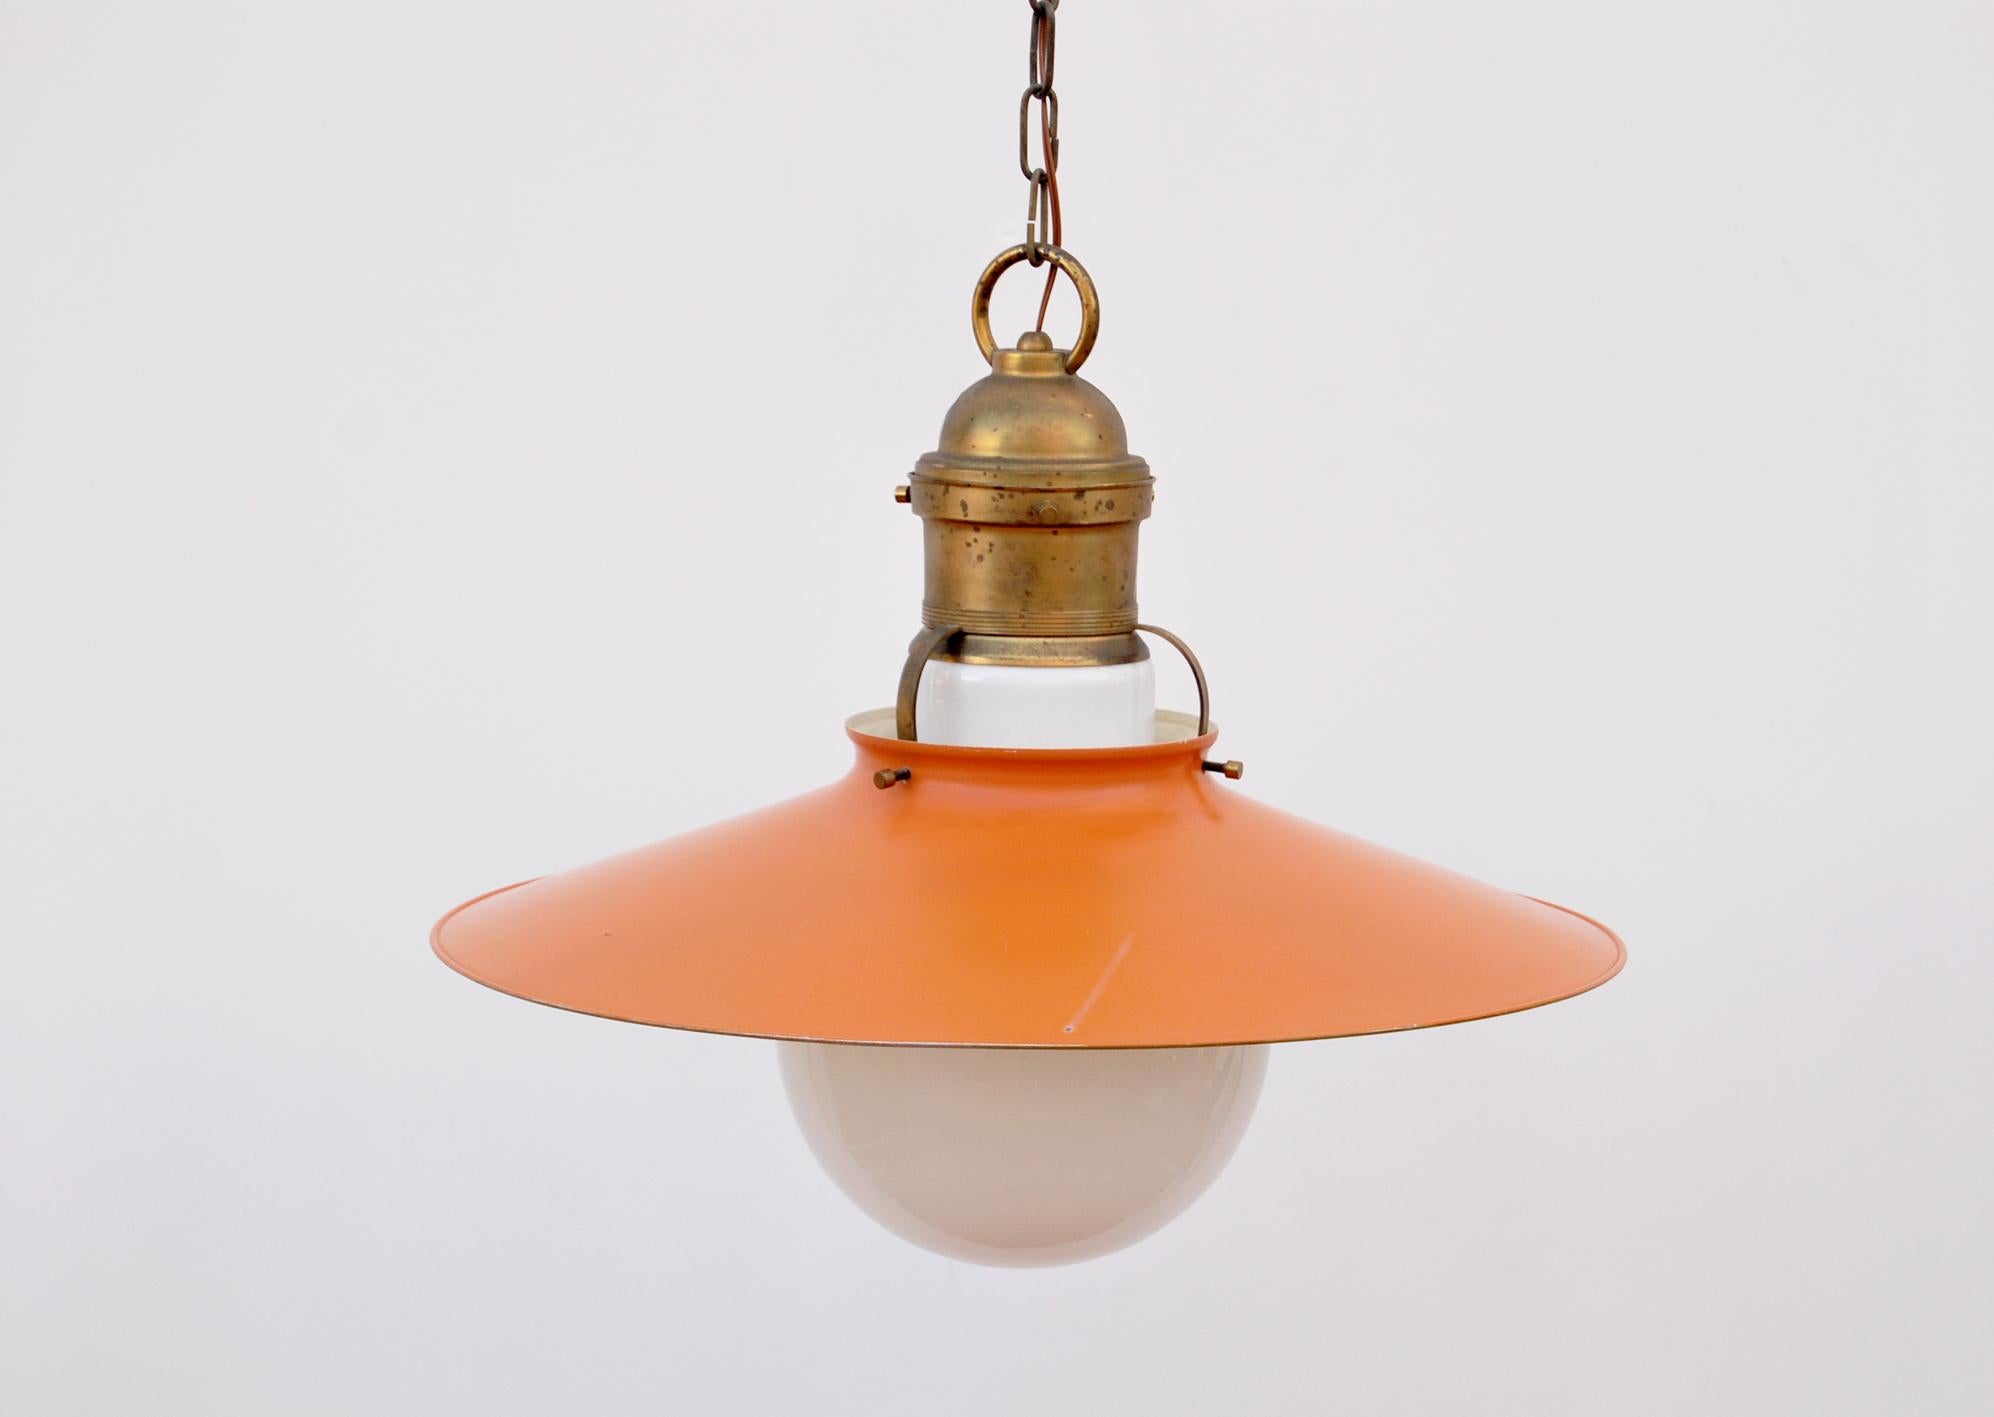 Pendant chandelier, 1950s.
Suspension chandelier made of brass and orange-colored iron, with opal glass shade covers (shaped like a light bulb). The electrical system has been rewired. At the top of the dish is a brass accessory containing the lamp